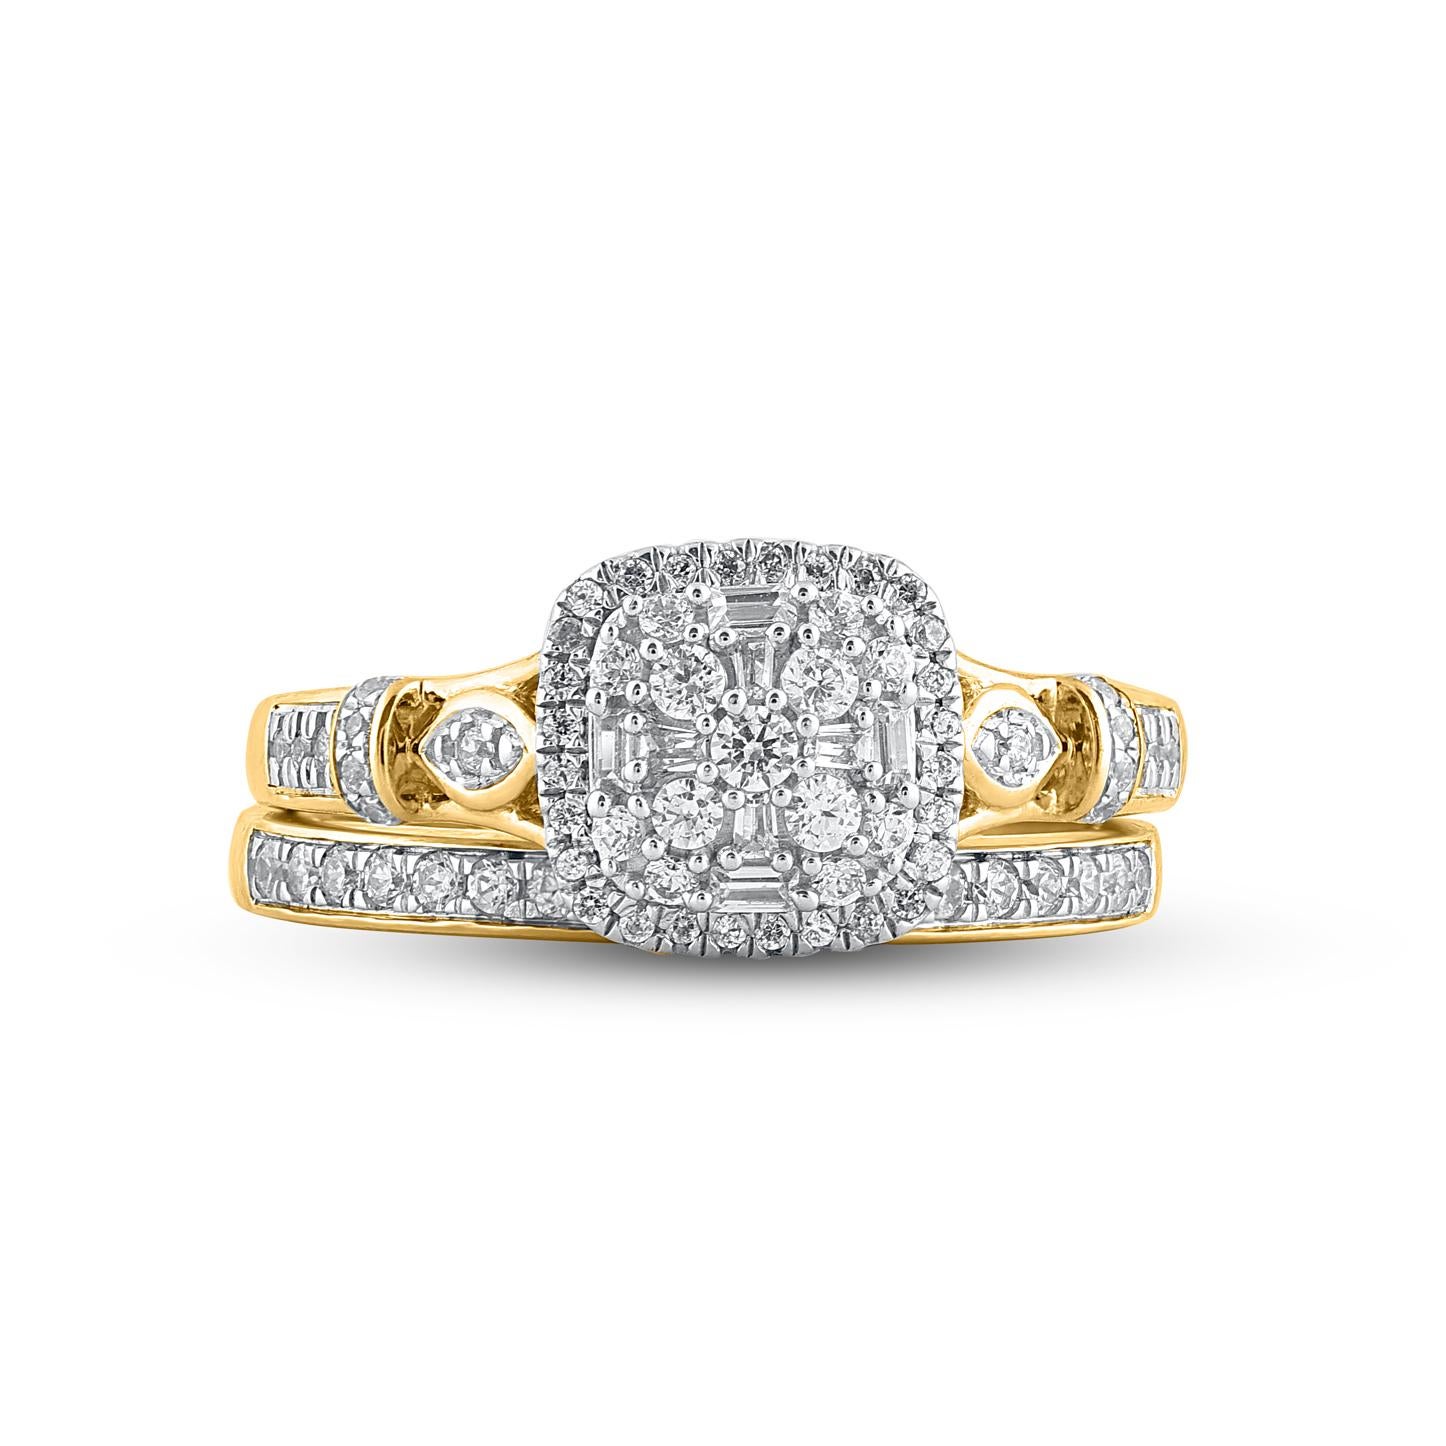 Express your love for her in the most classic way with this halo wedding ring. This ring is expertly crafted in 14 Karat yellow gold and features of this ring brilliant cut, single cut and baguette cut 90 diamond set in pave & prong setting. Total